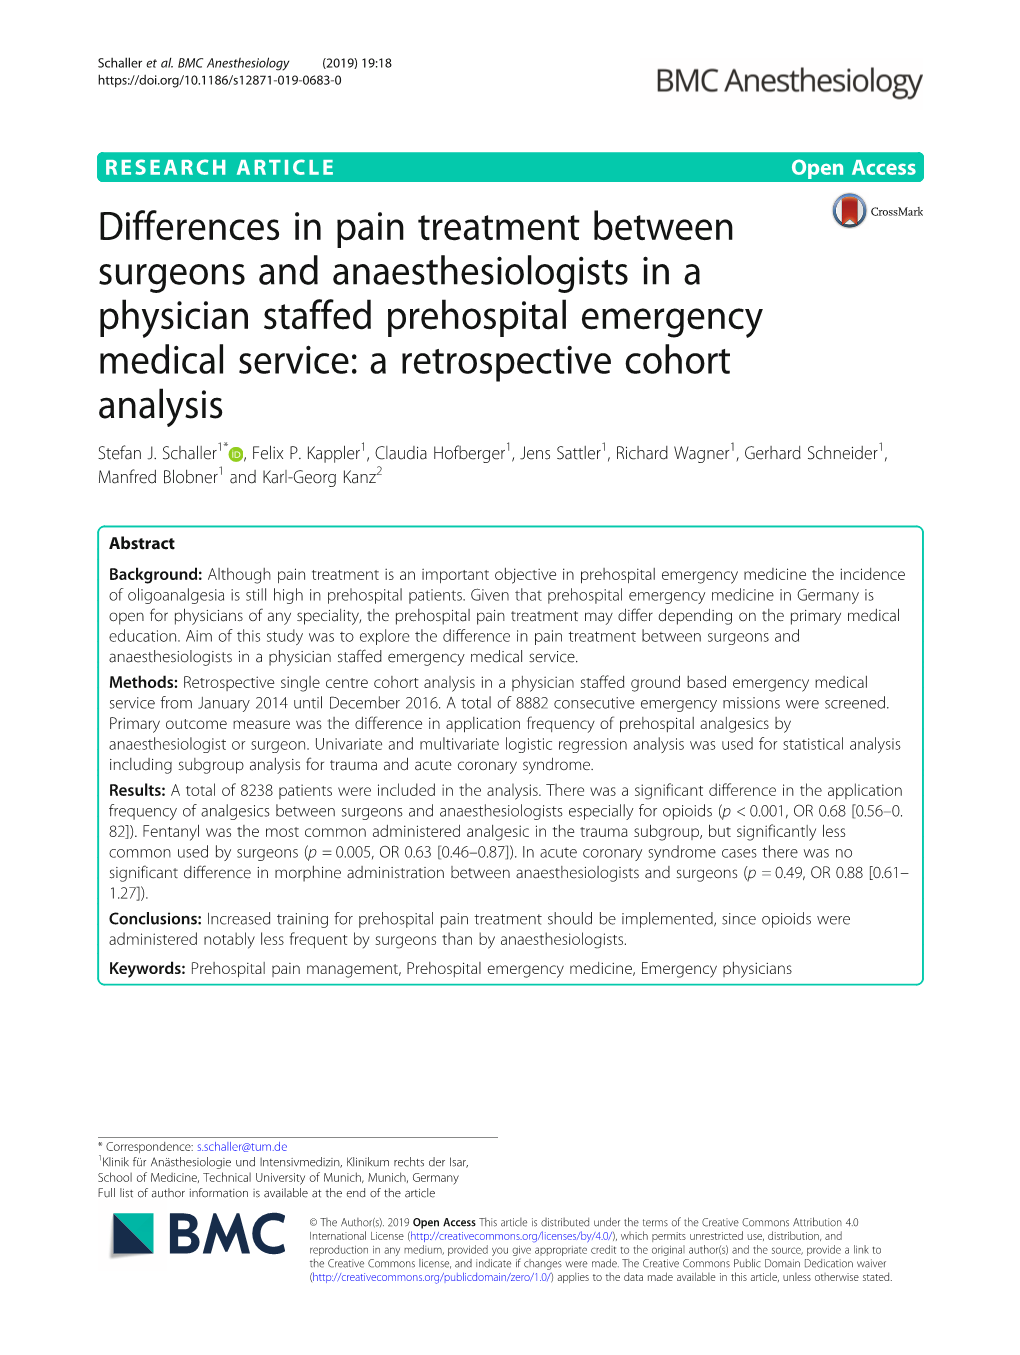 Differences in Pain Treatment Between Surgeons